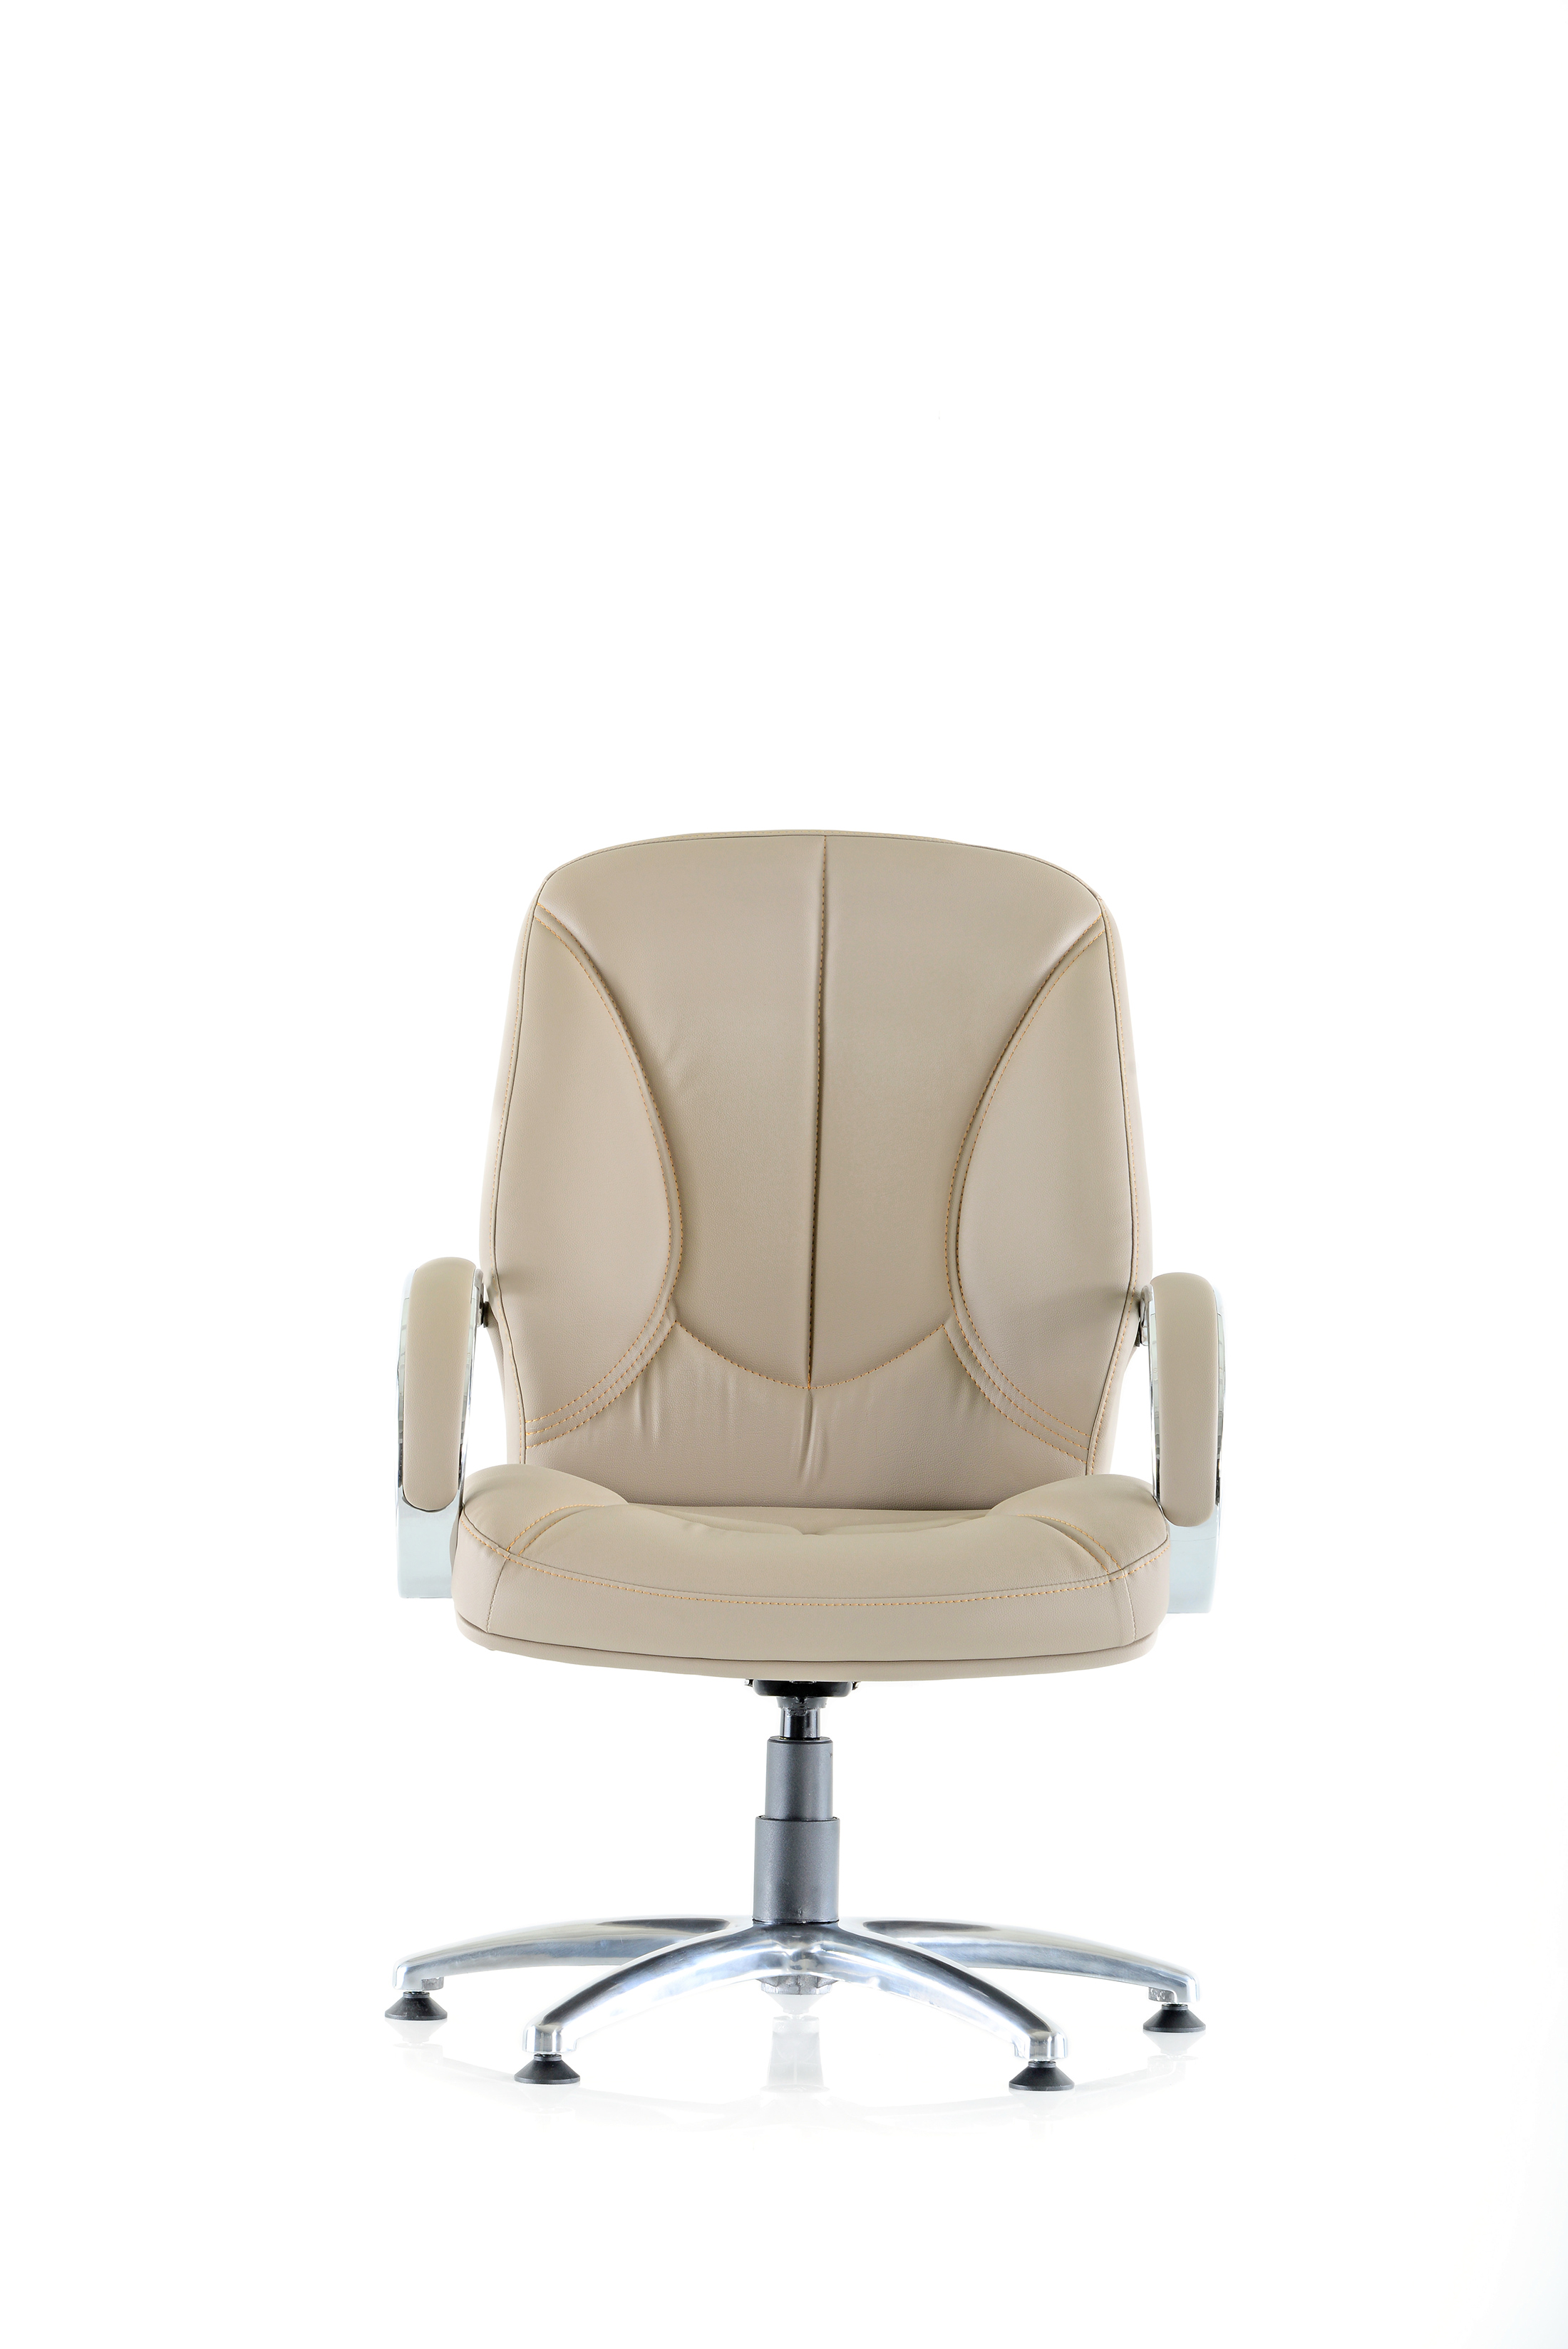 RICCO 200C VISITOR CHAIR